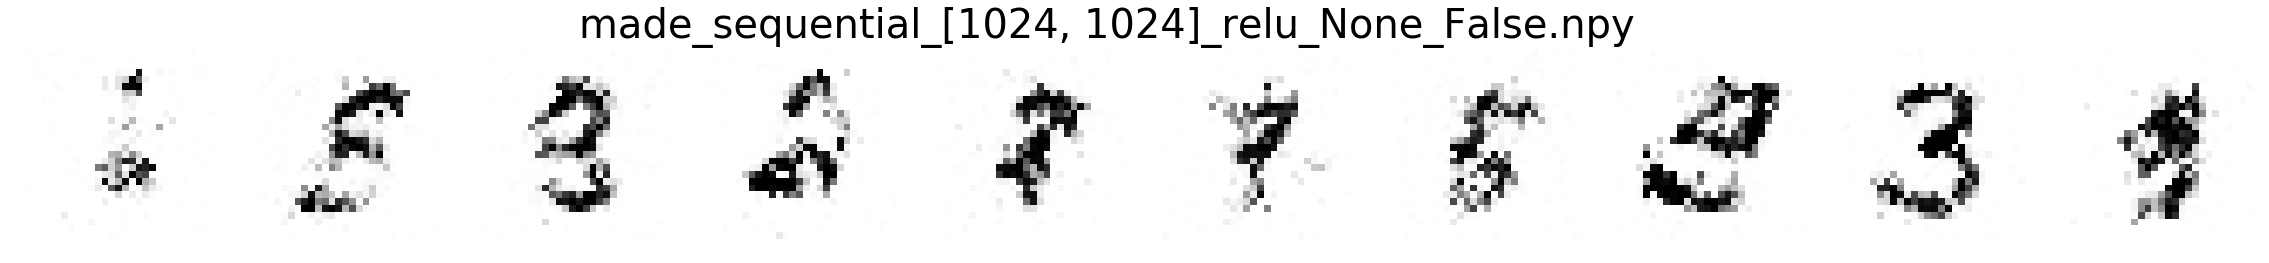 ../../_images/generated_notebooks_demo_mnist_deep_copula_13_0.png